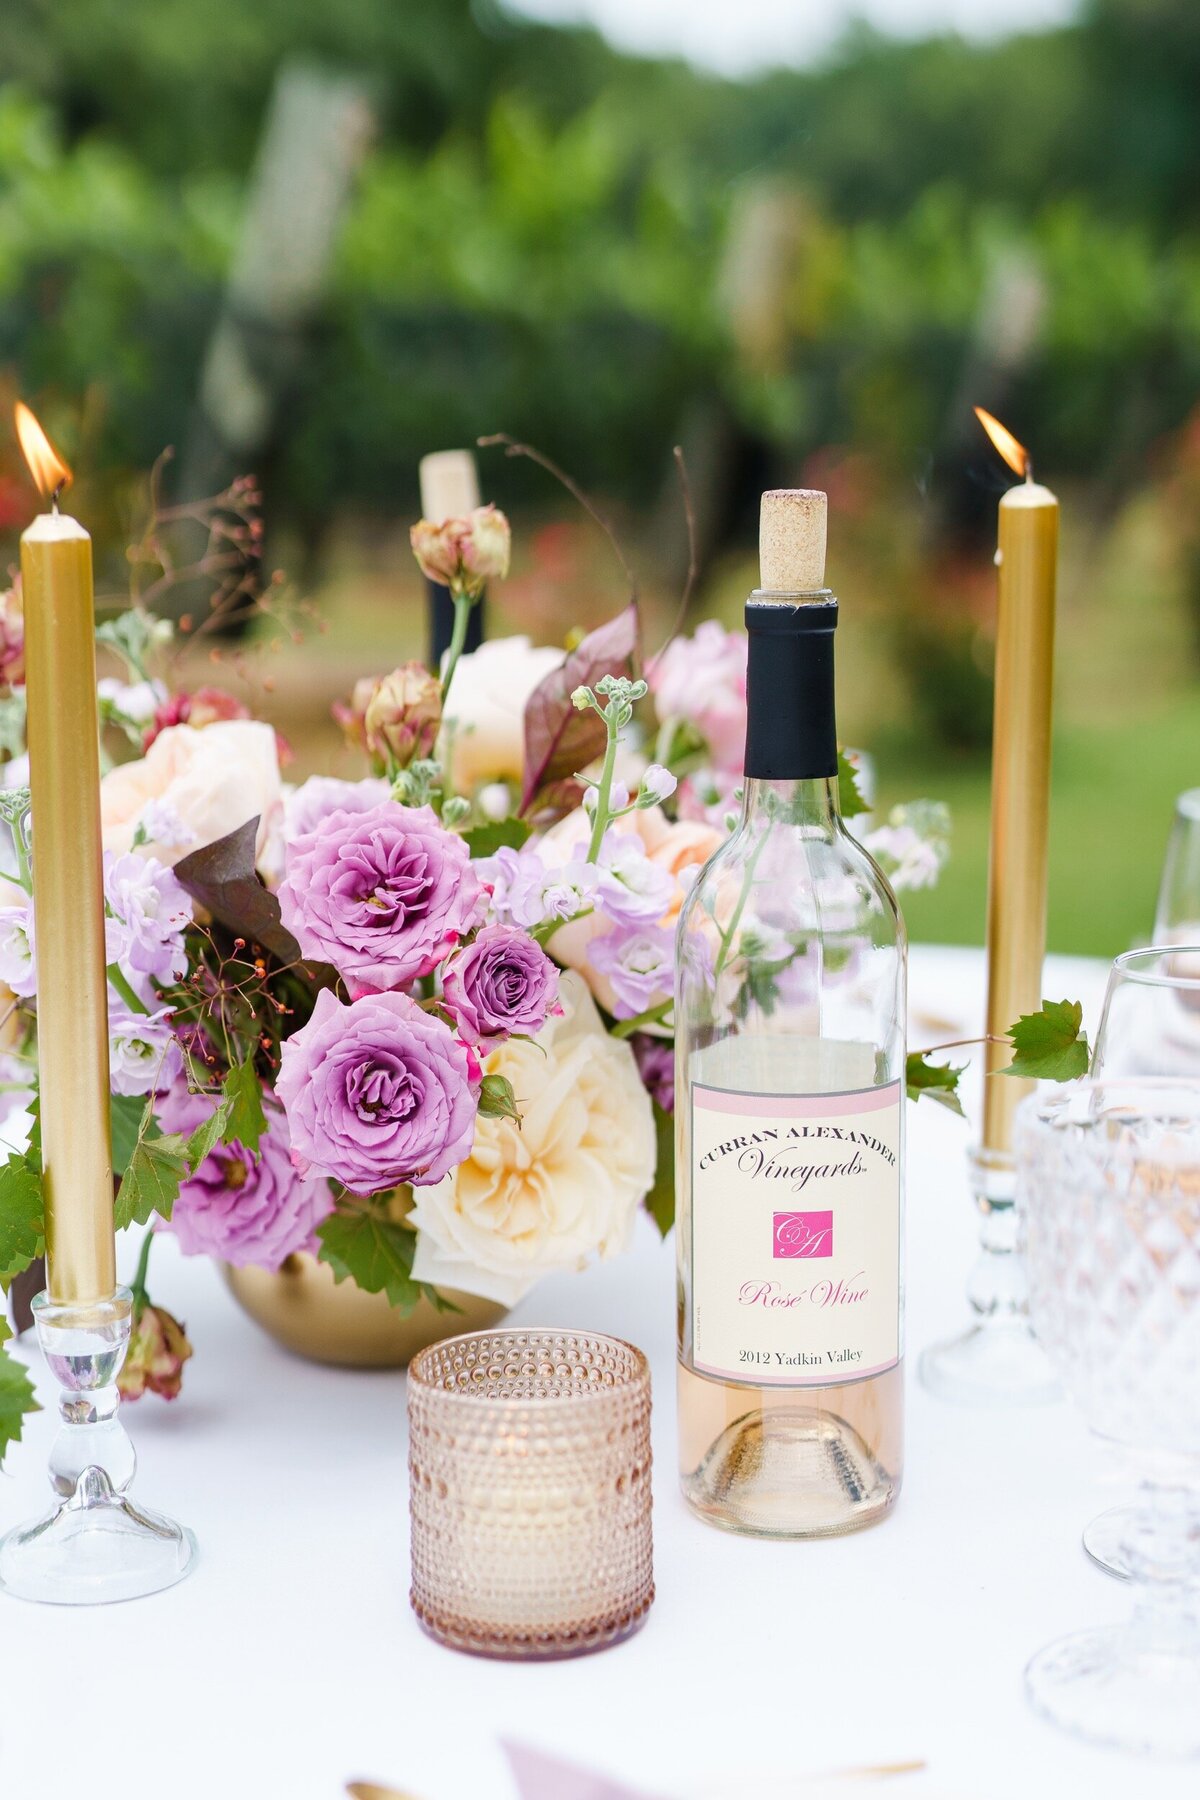 A closeup photo featuring a bottle of wine and lavender and gold accents at a vineyard wedding near Charlotte, NC.